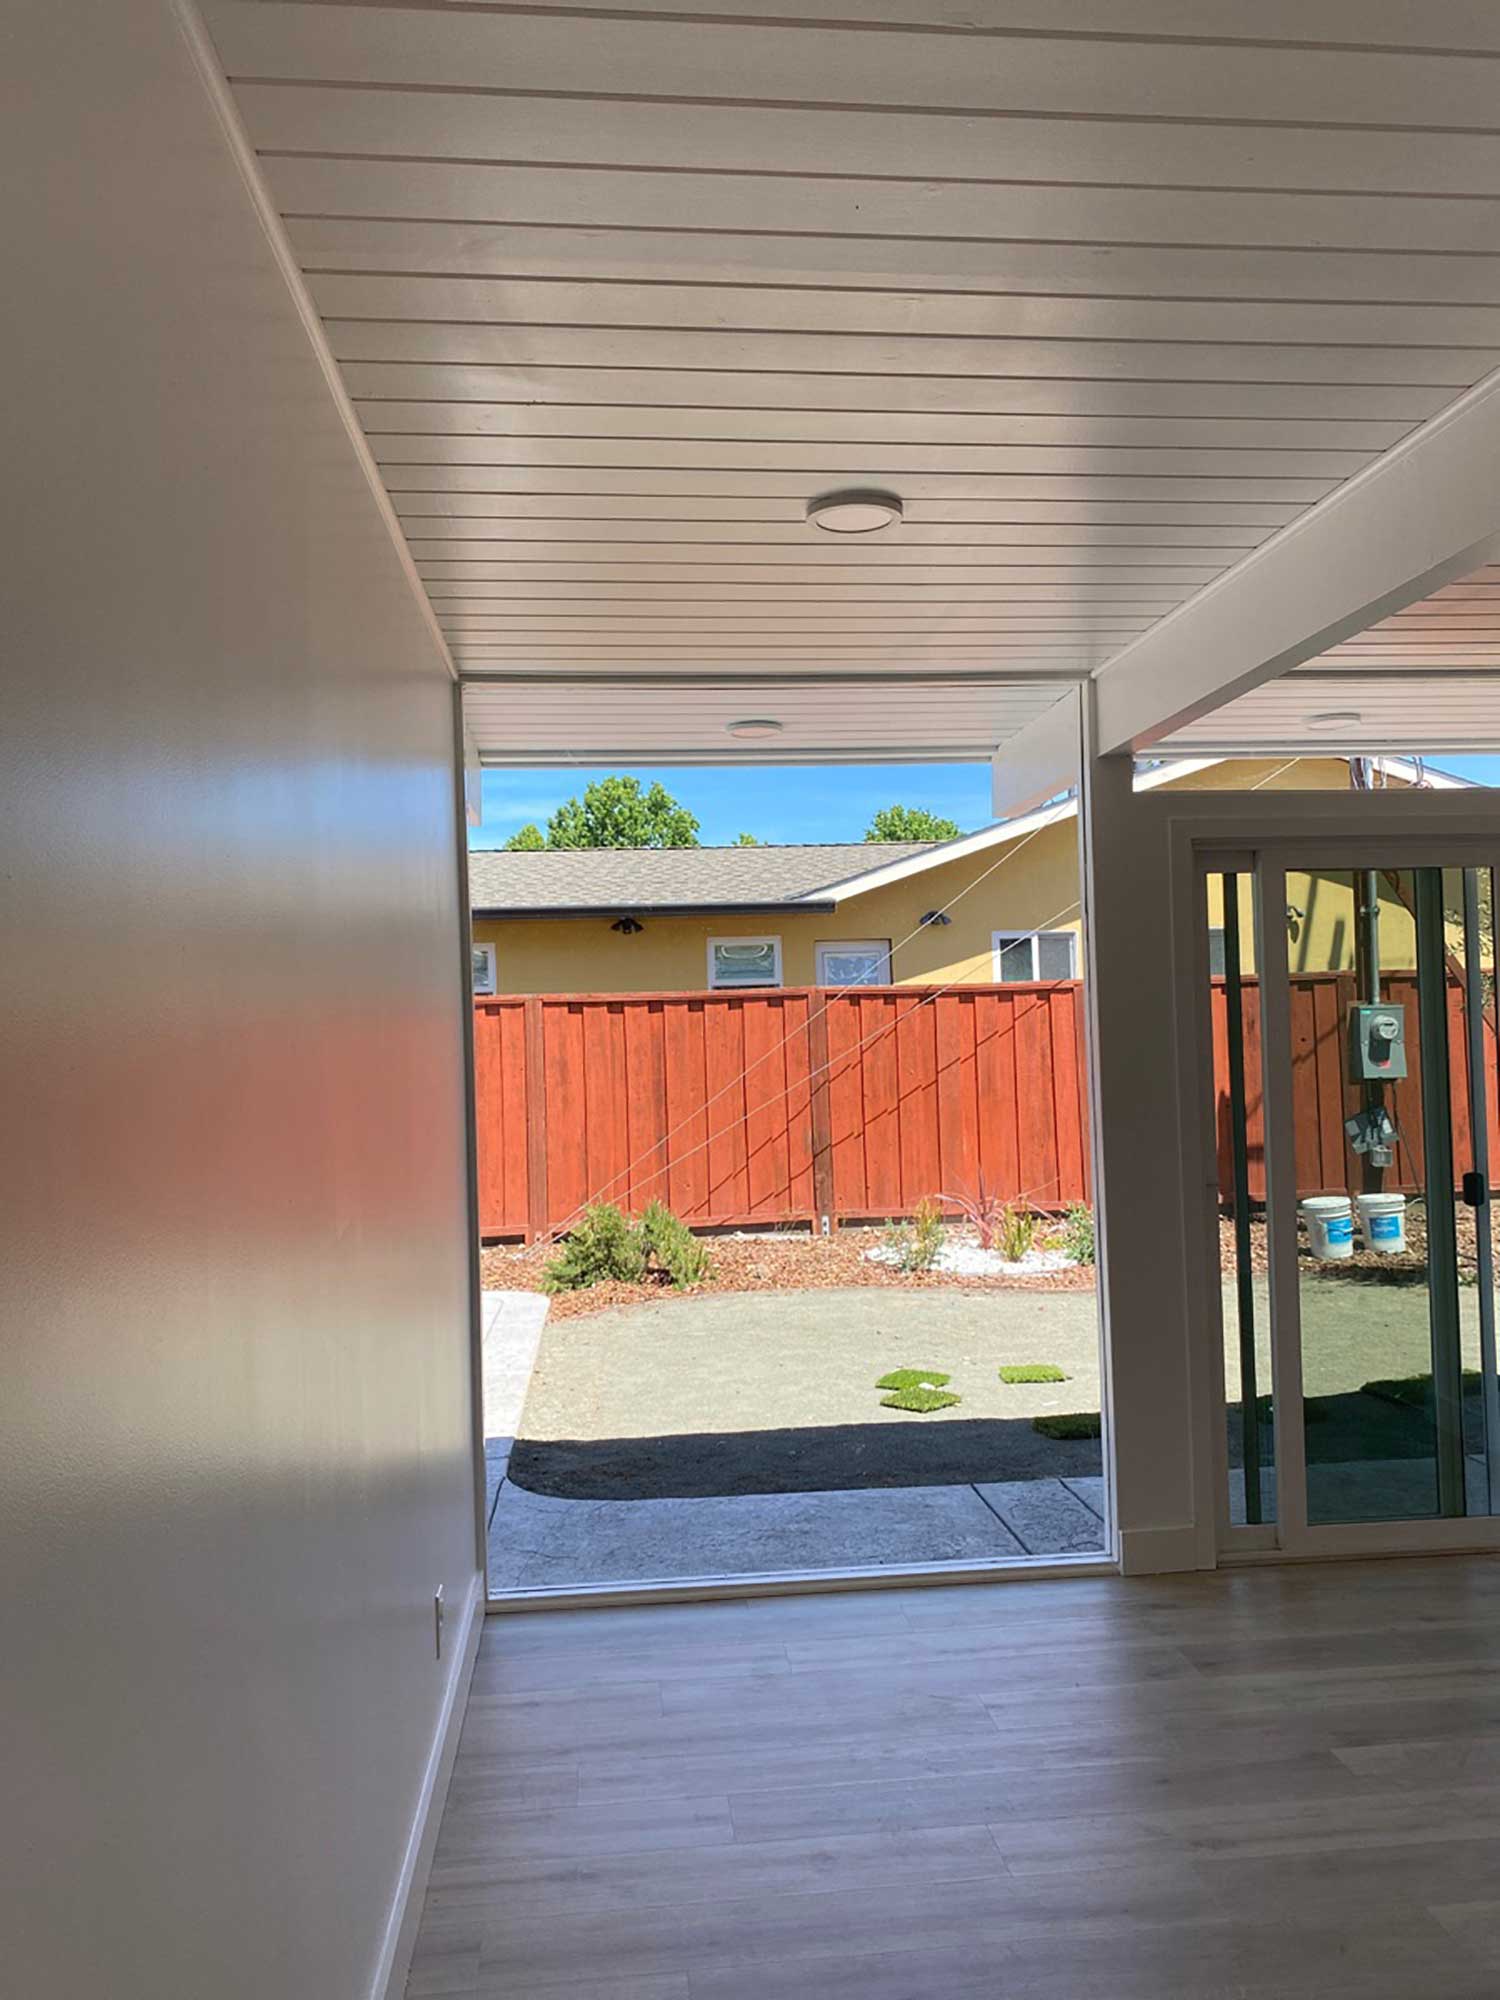 ClimatePro installed 3M Safety Film on this Eichler Home in San Jose.